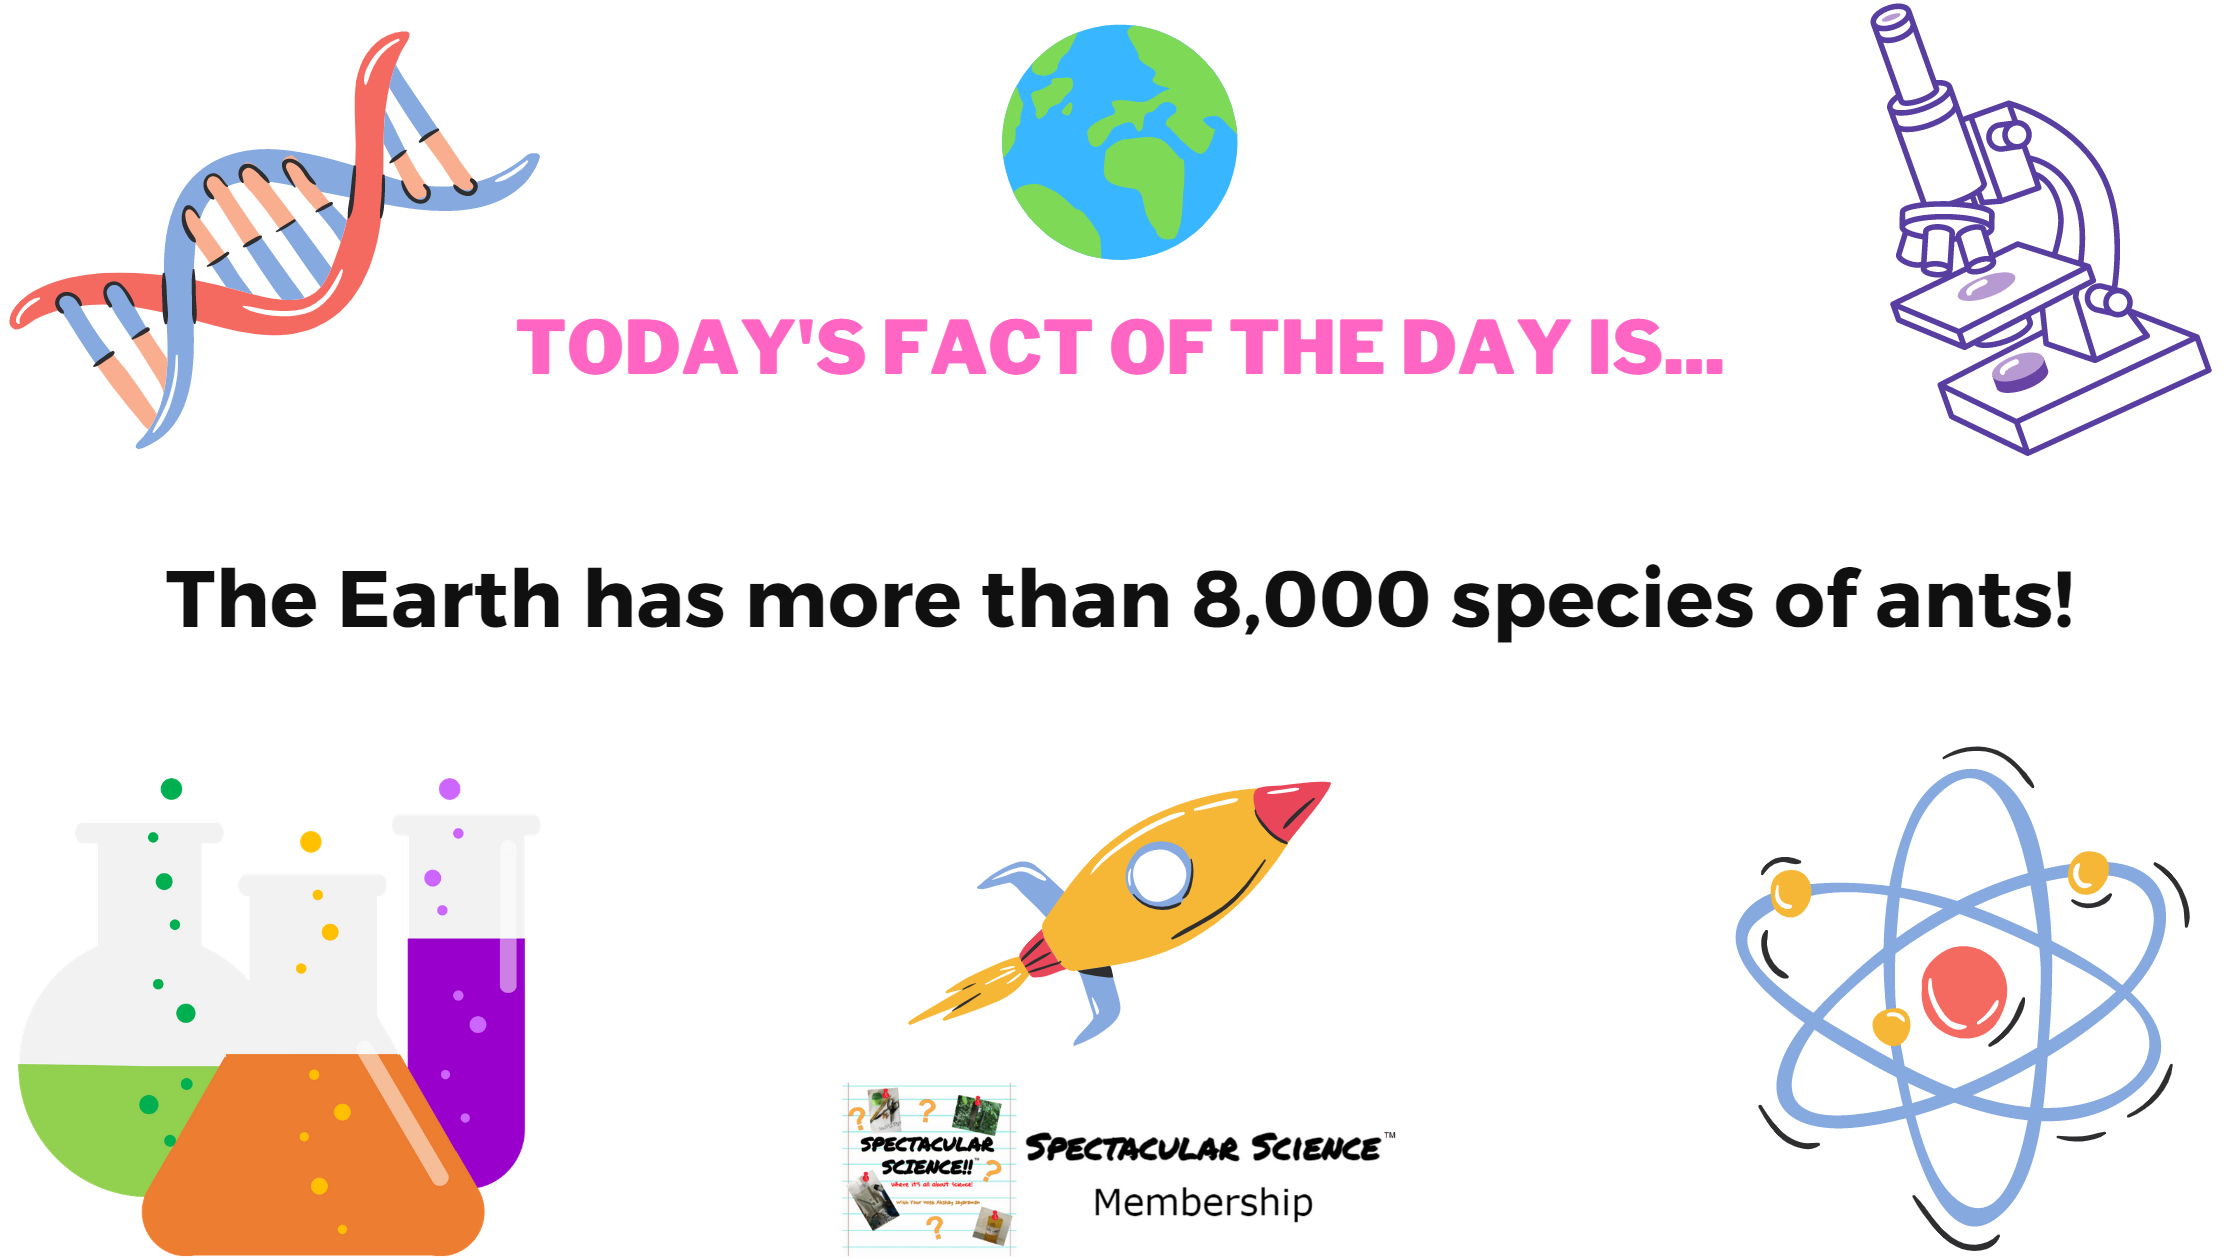 Fact of the Day Image February 7th